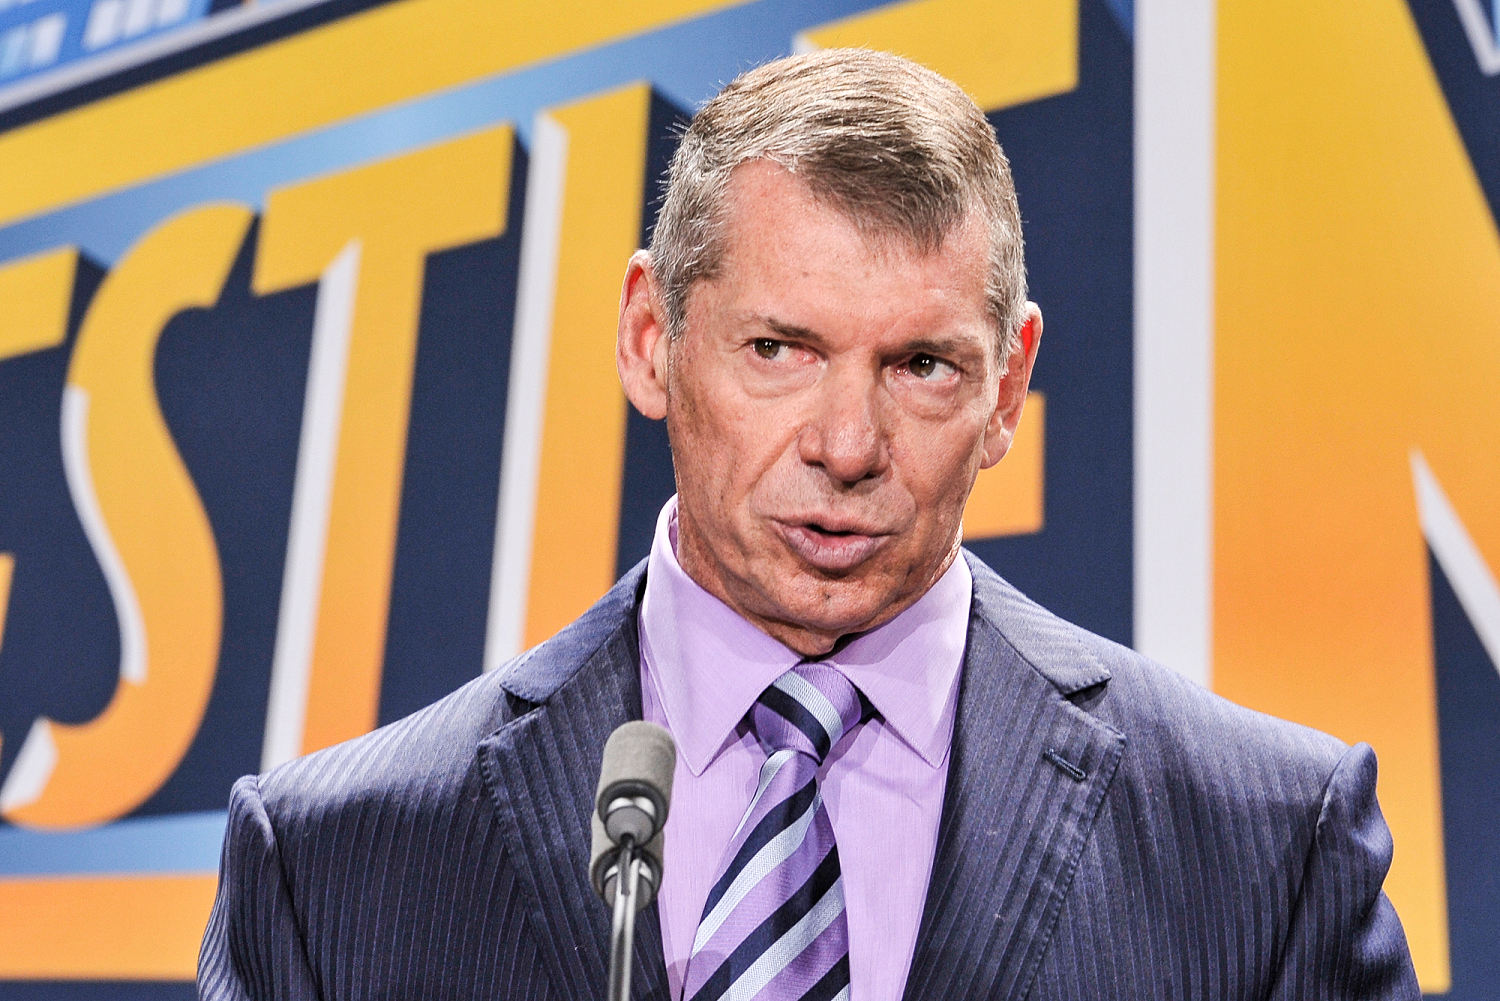 Former WWE employee suing Vince McMahon agrees to pause case pending a federal investigation, lawyer says